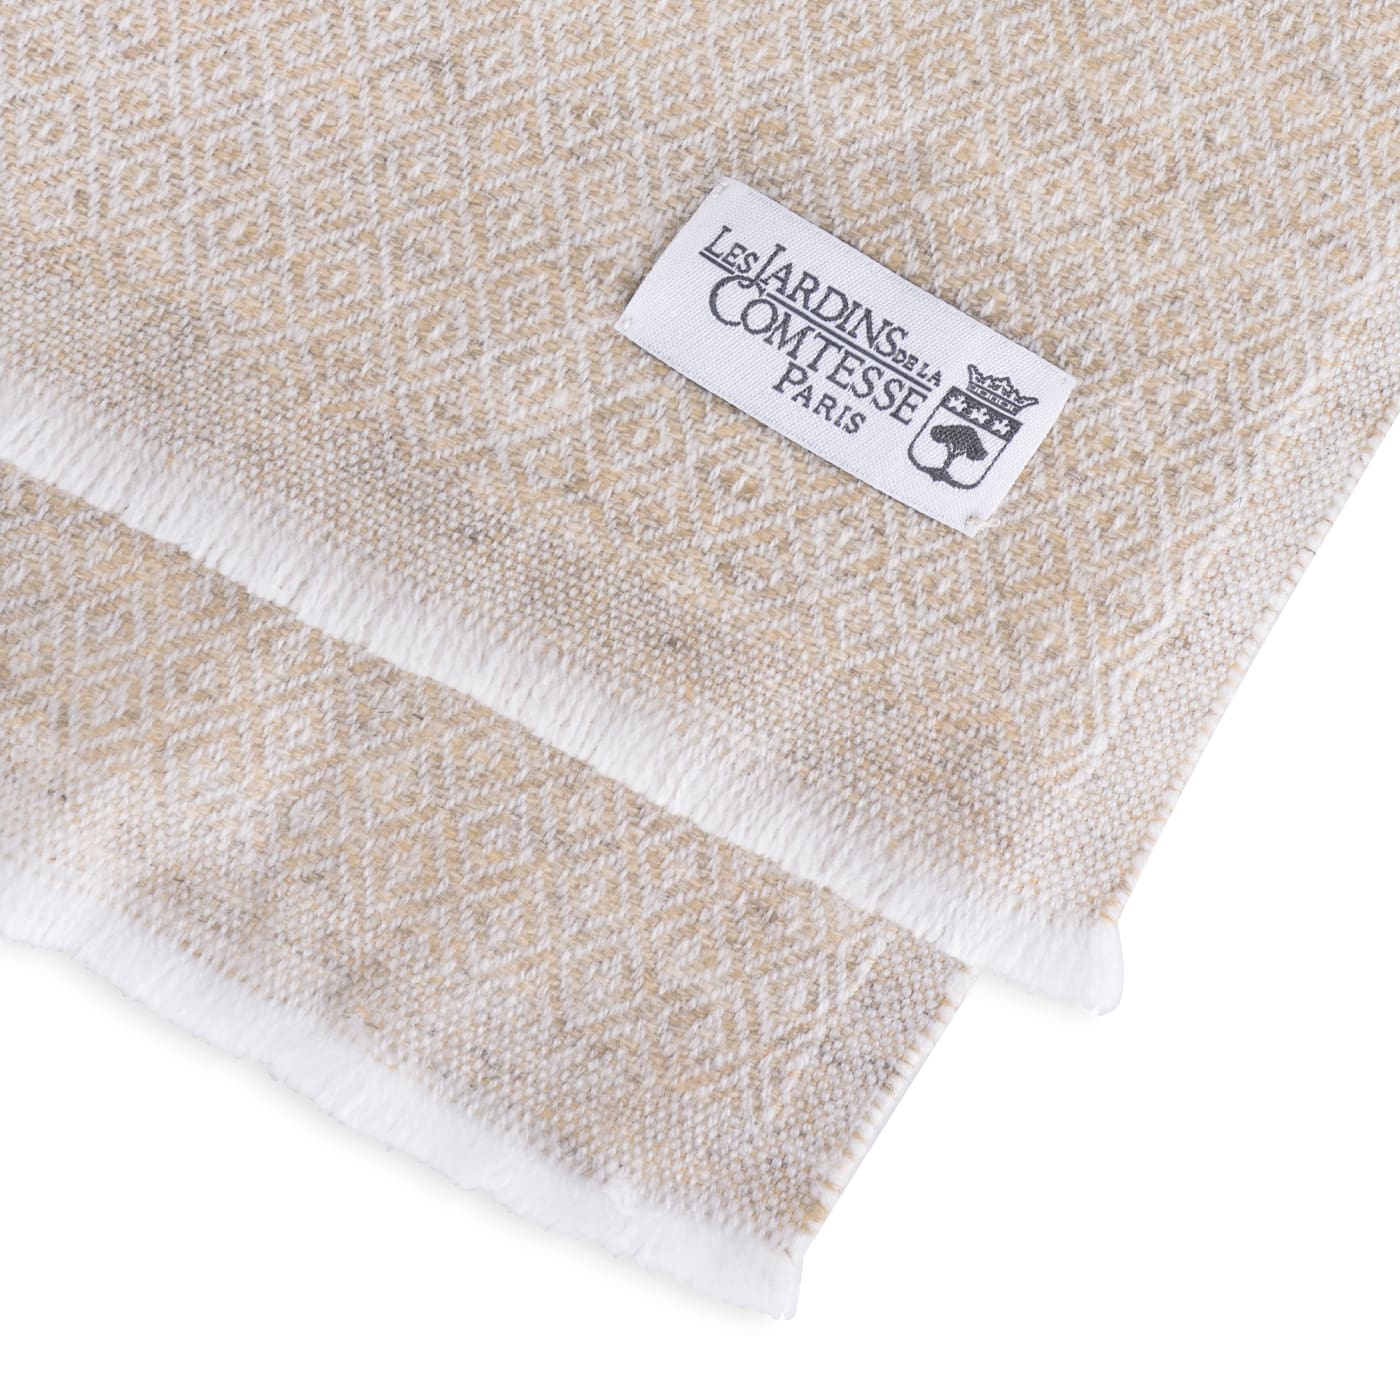 Men's camel cashmere and wool scarf - Diamond pattern